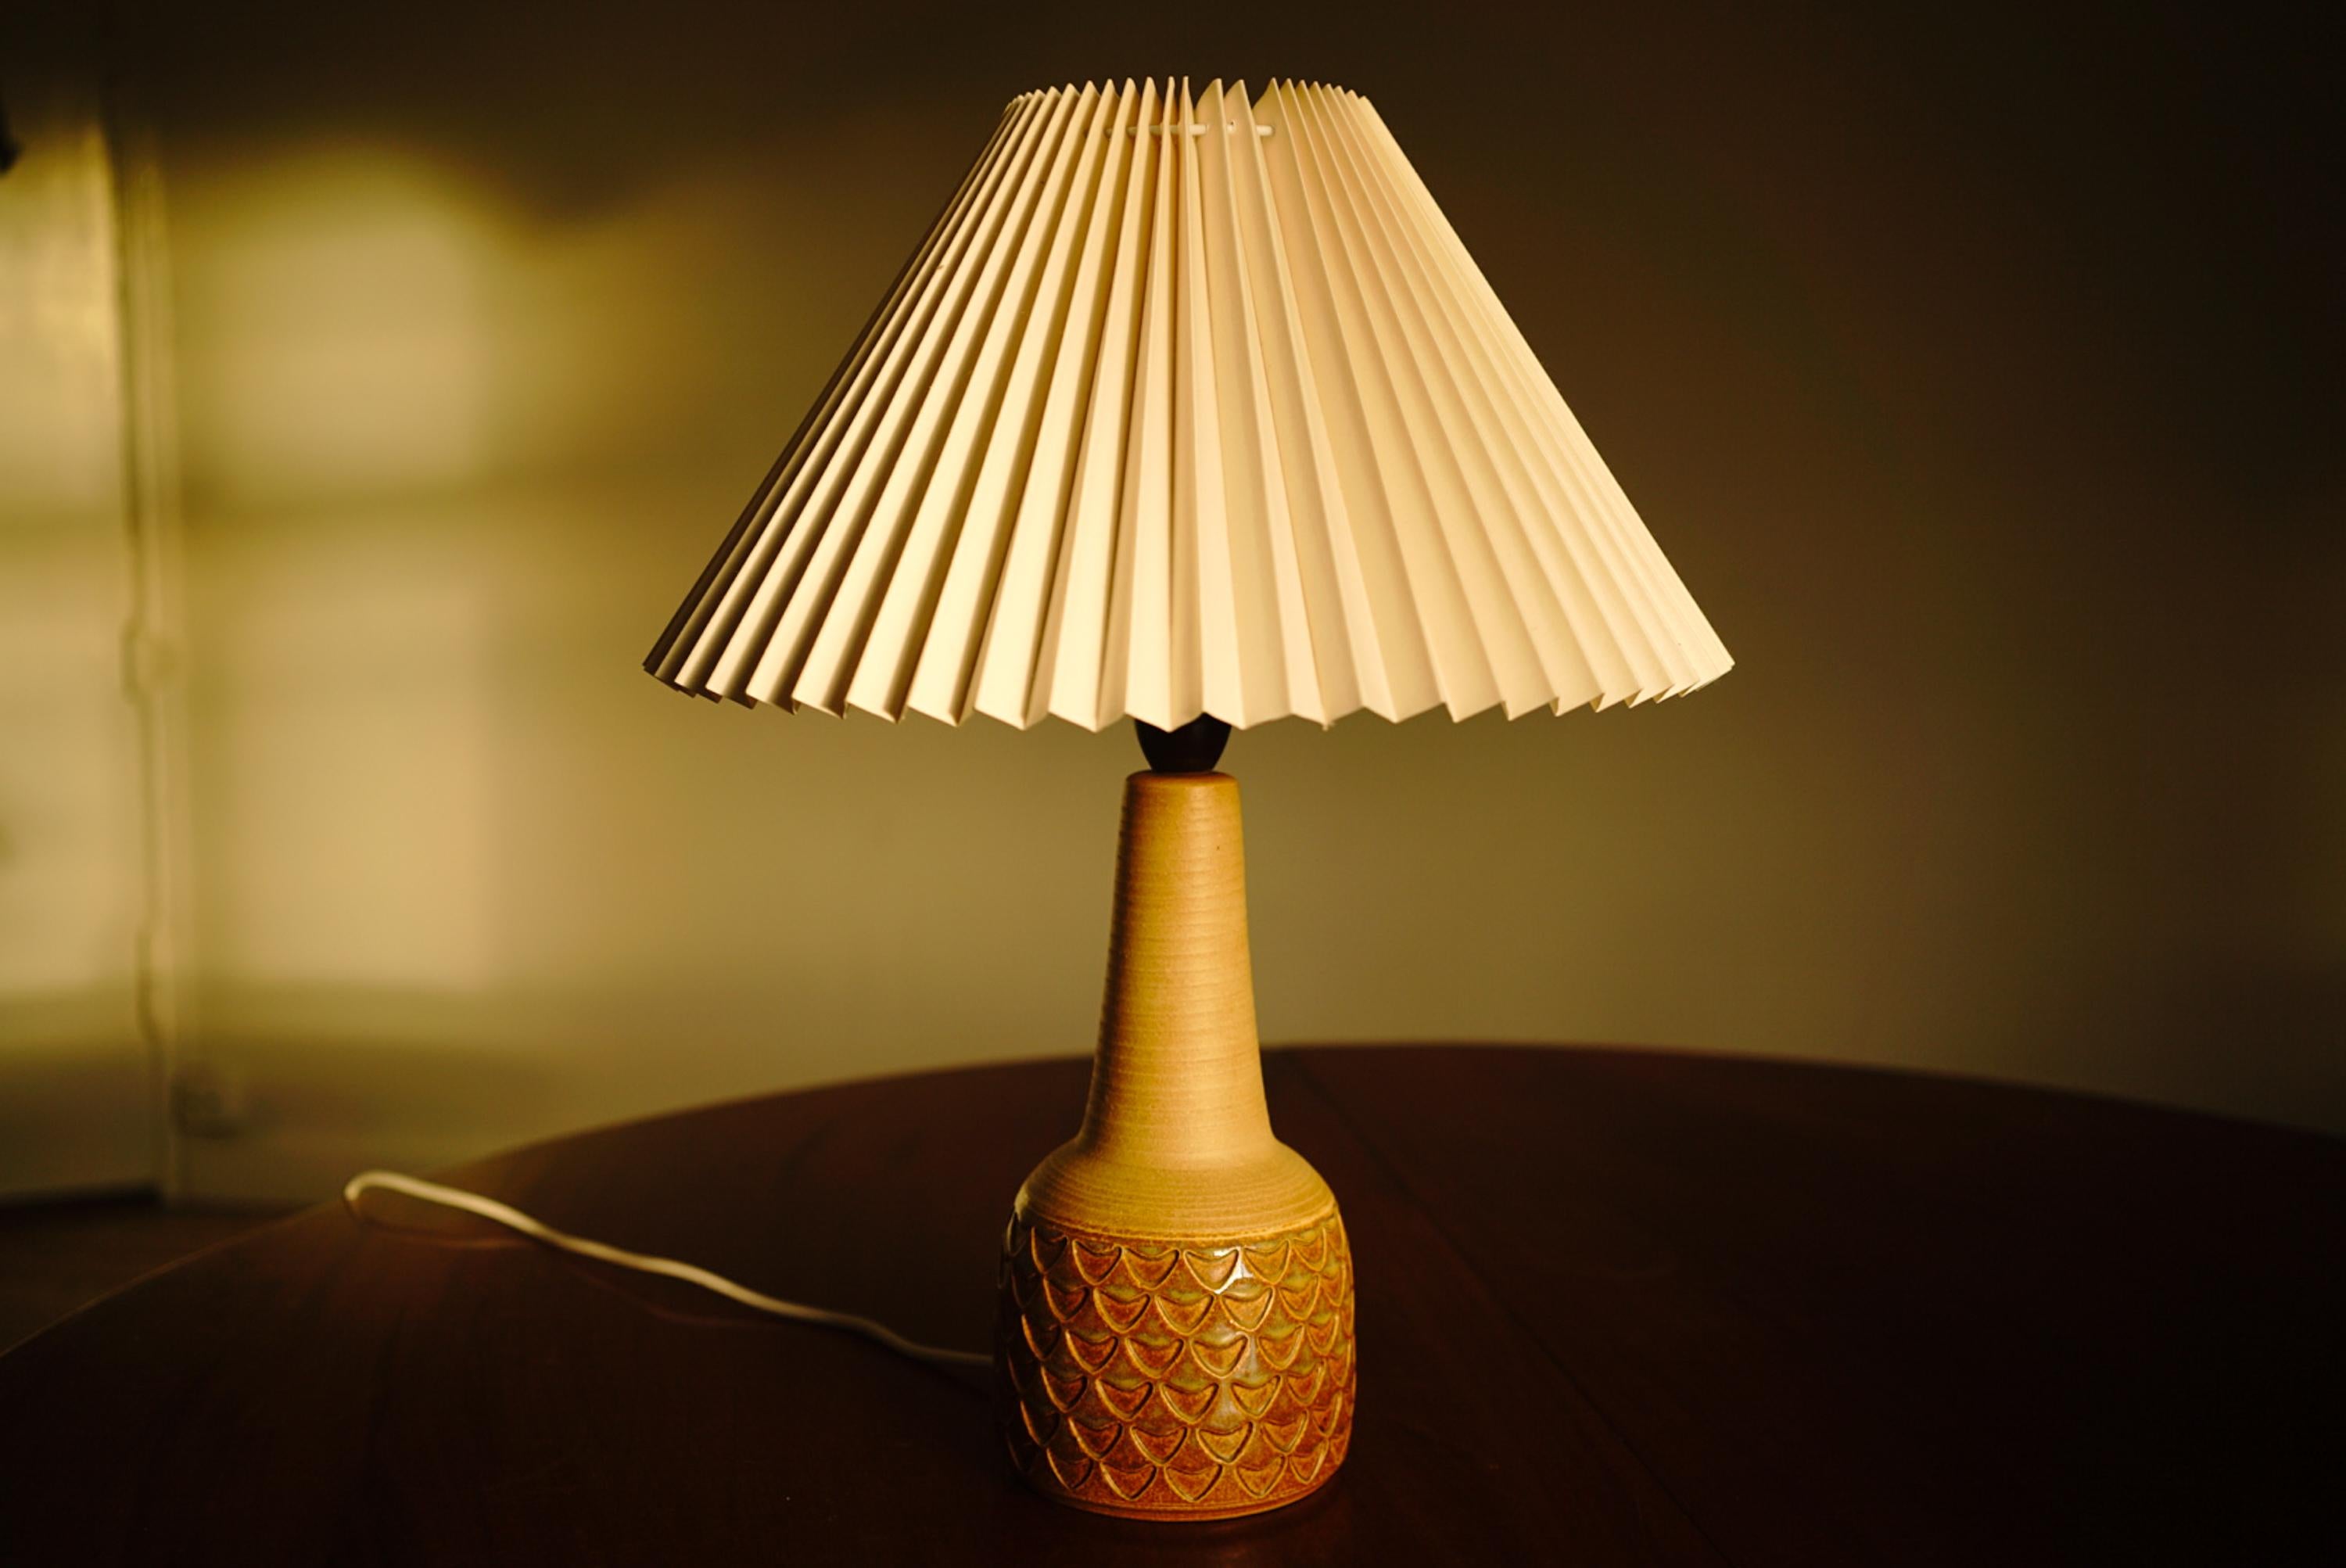 A stoneware table lamp handmade by Einar Johansen for Danish Søholm located on the island of Bornholm in Denmark in the 1960s.

Stamped and signed on the base.

Sold without lampshade. Height includes socket. fully functional and in beautiful